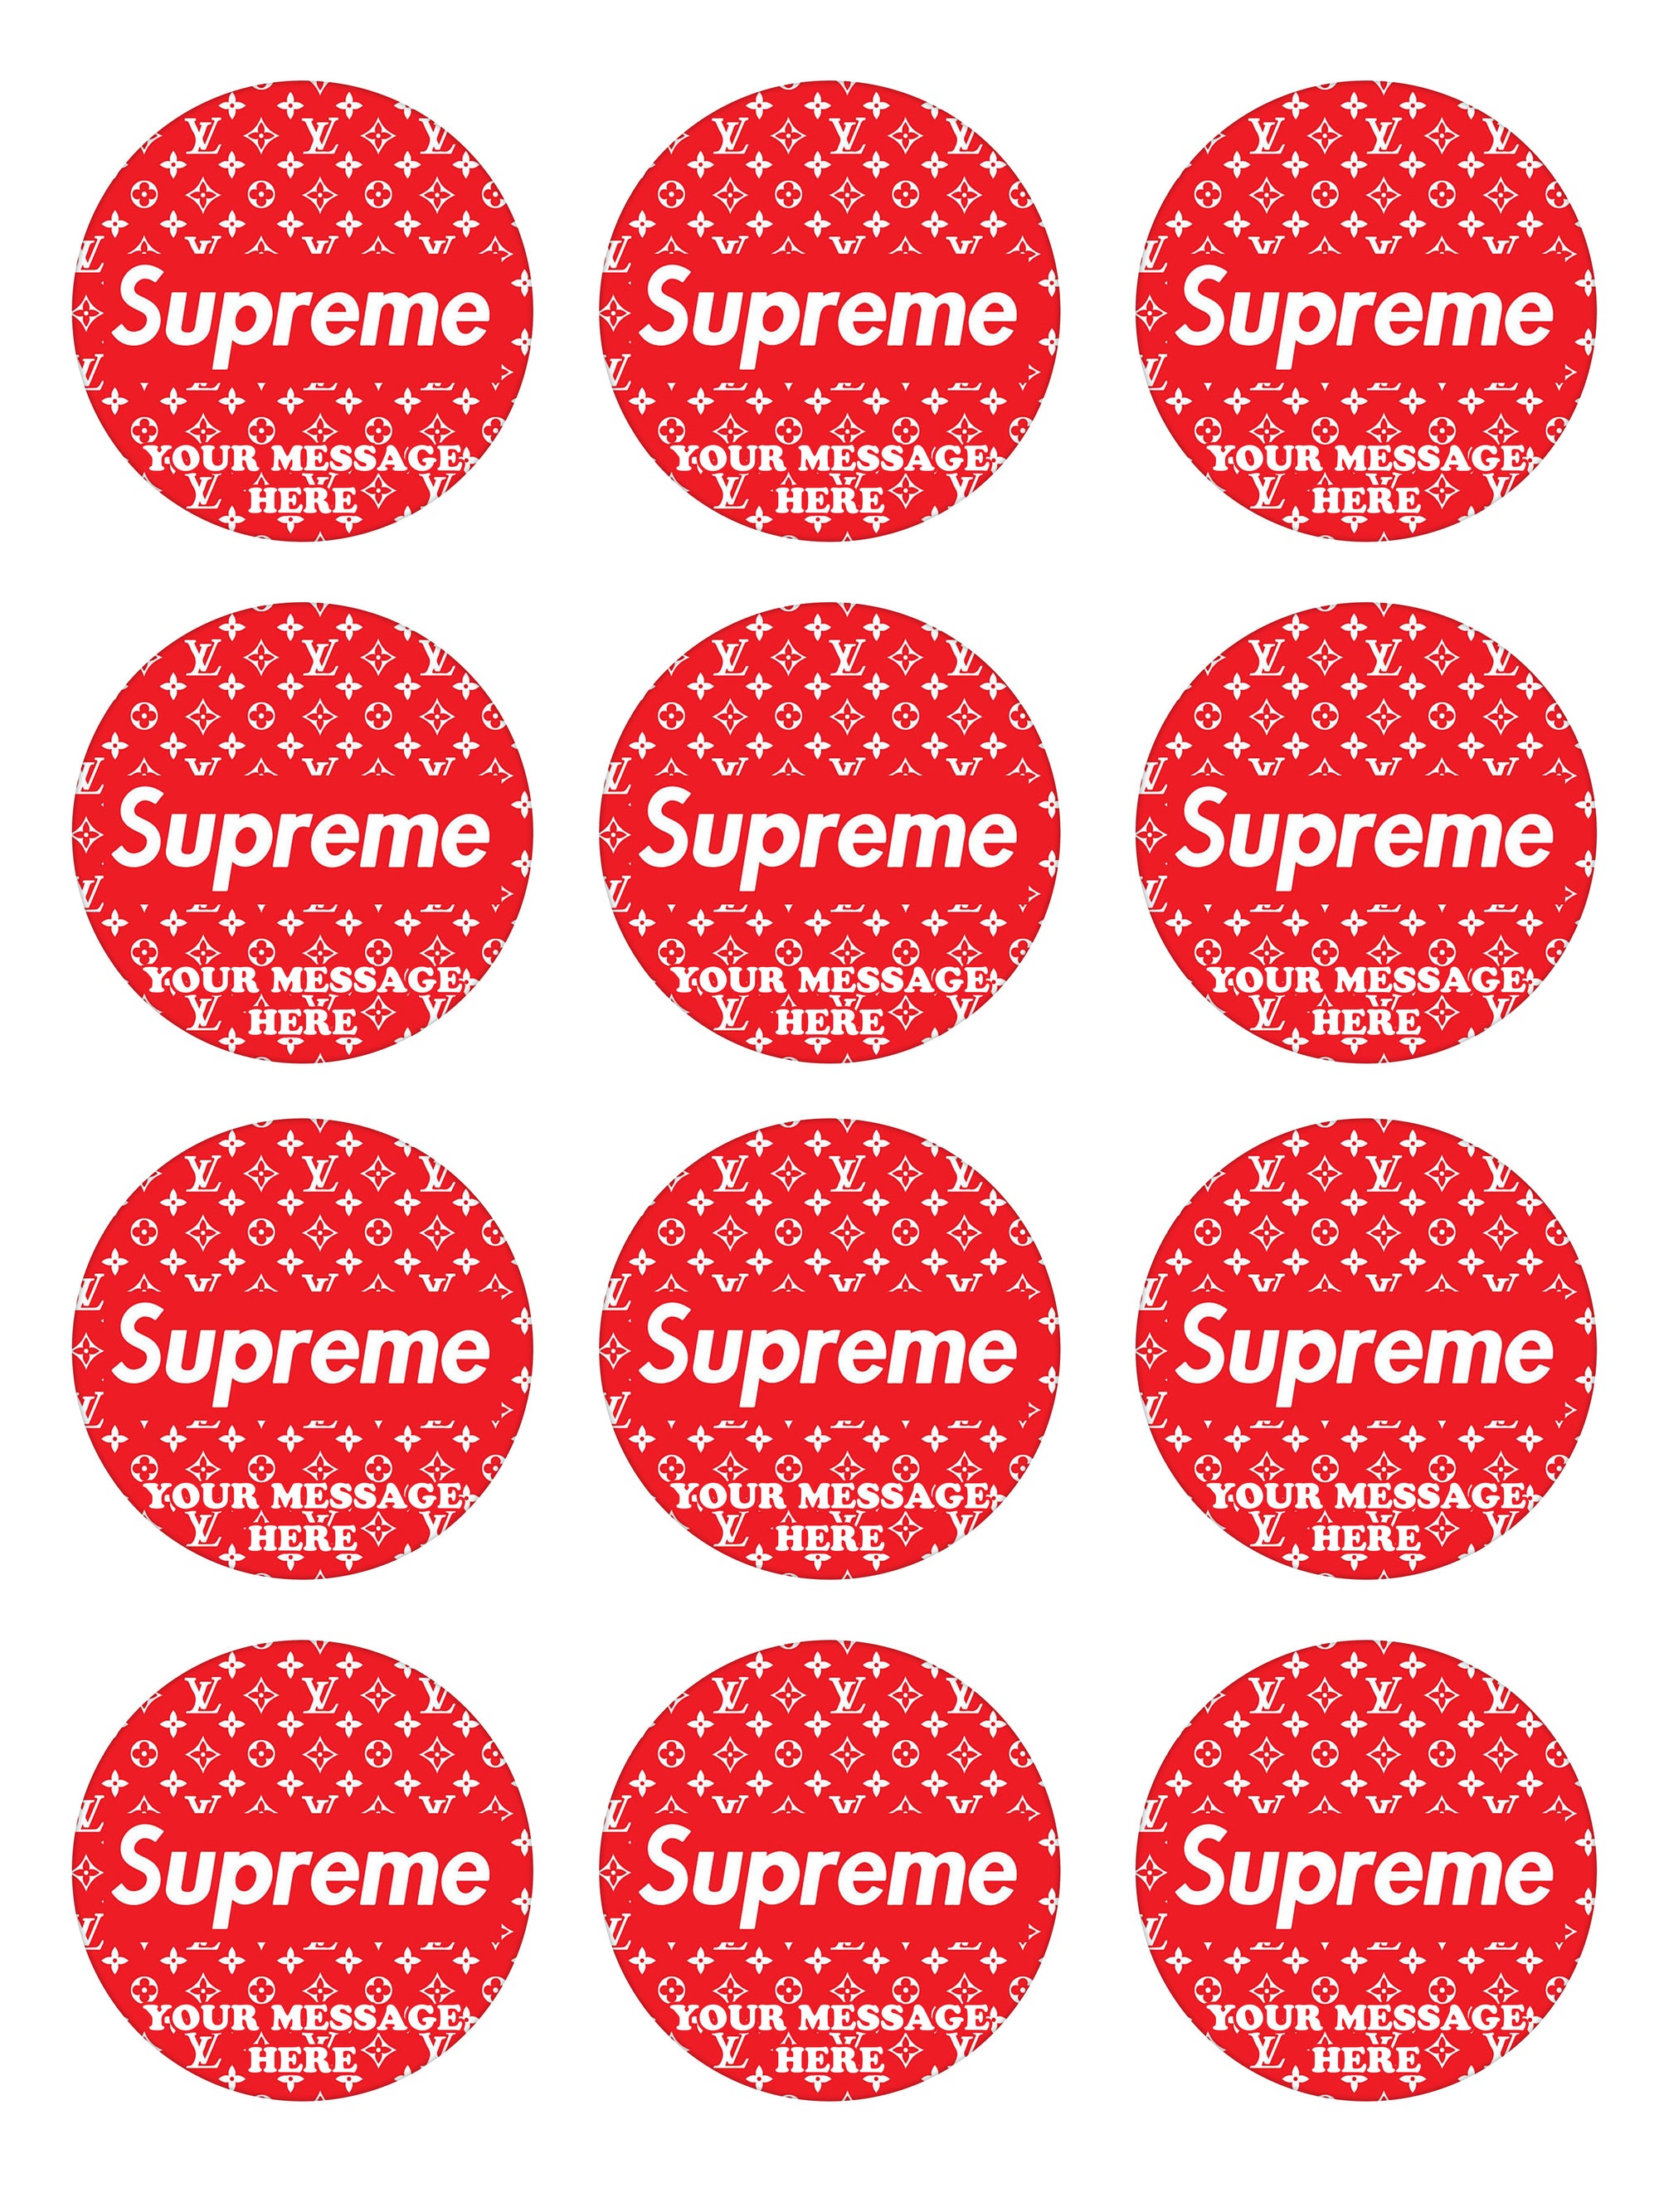 Supreme Clothing Logo Personalized Edible Cake Topper Image ABPID52047